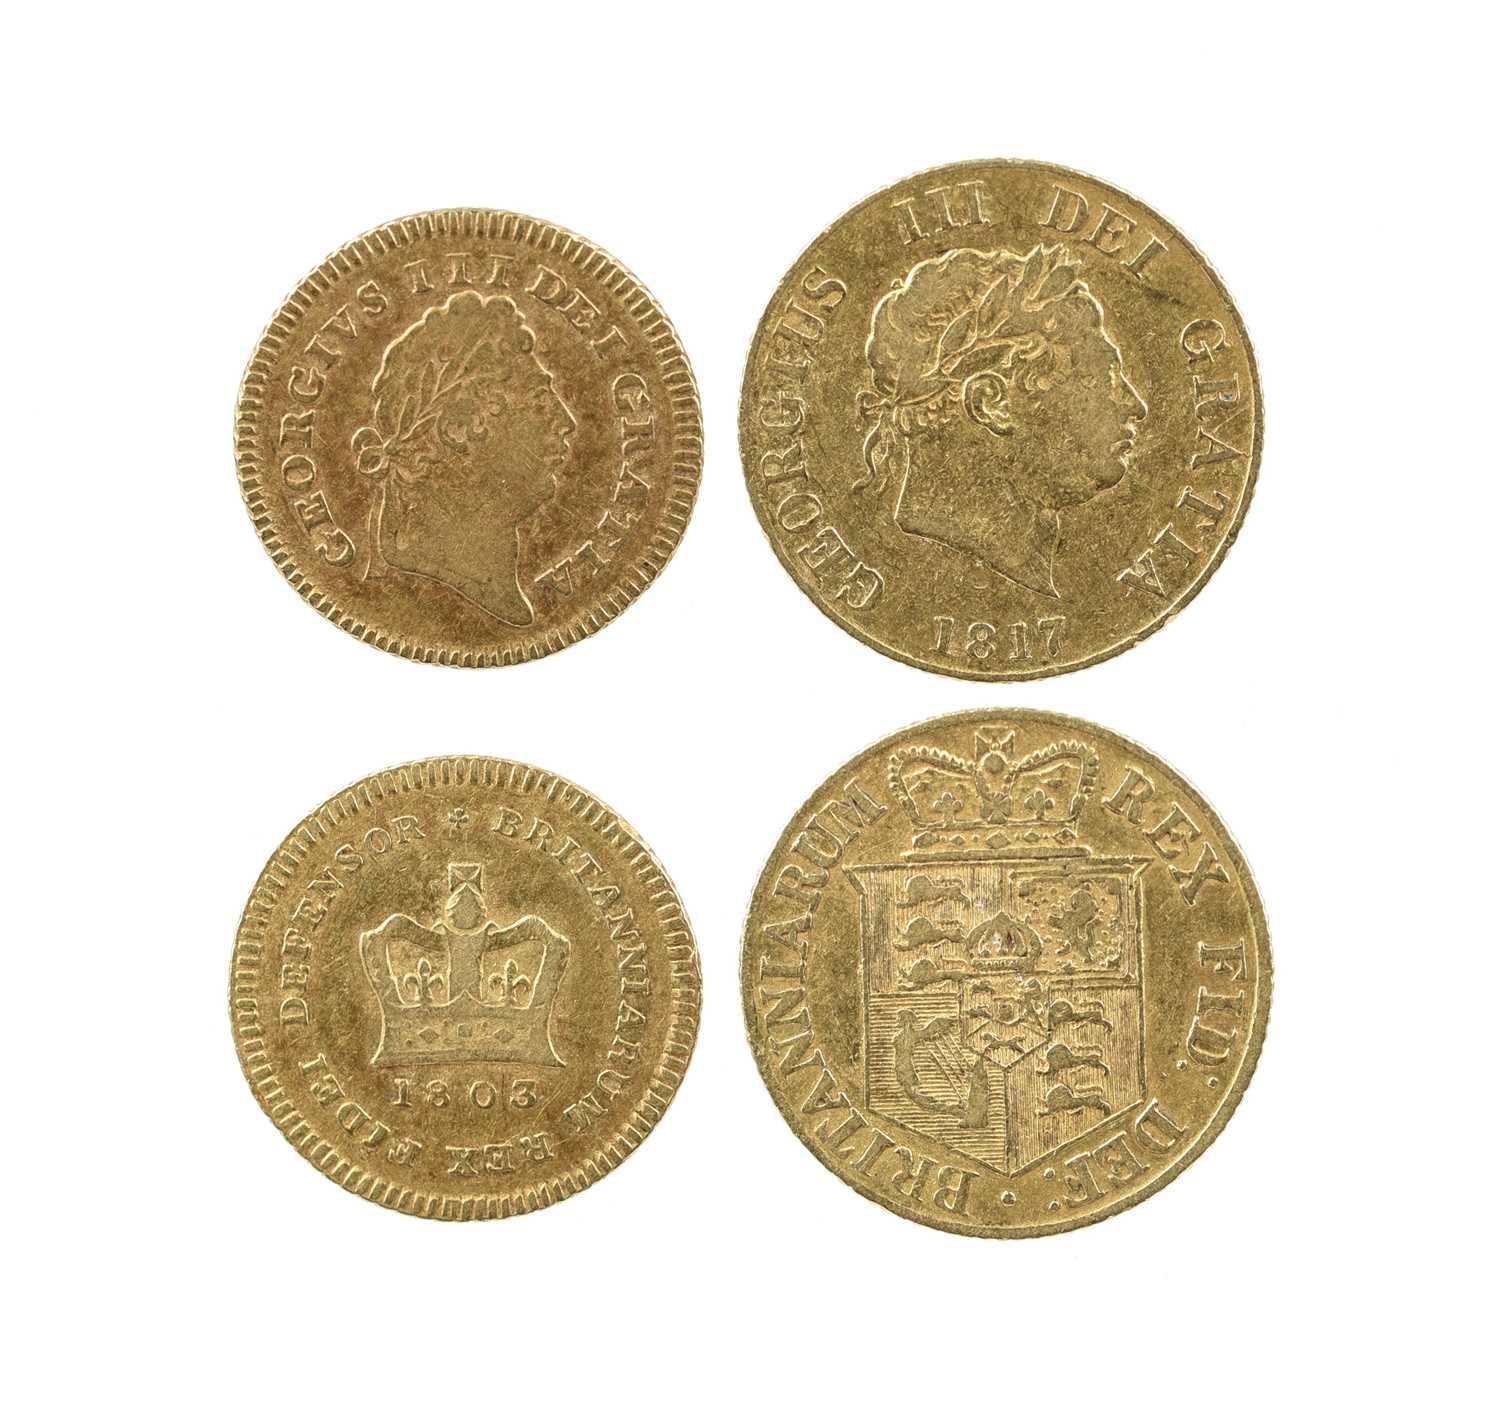 George III, gold coins (2): third-guinea, 1803 (S 3739), good fine or a little better; and half-